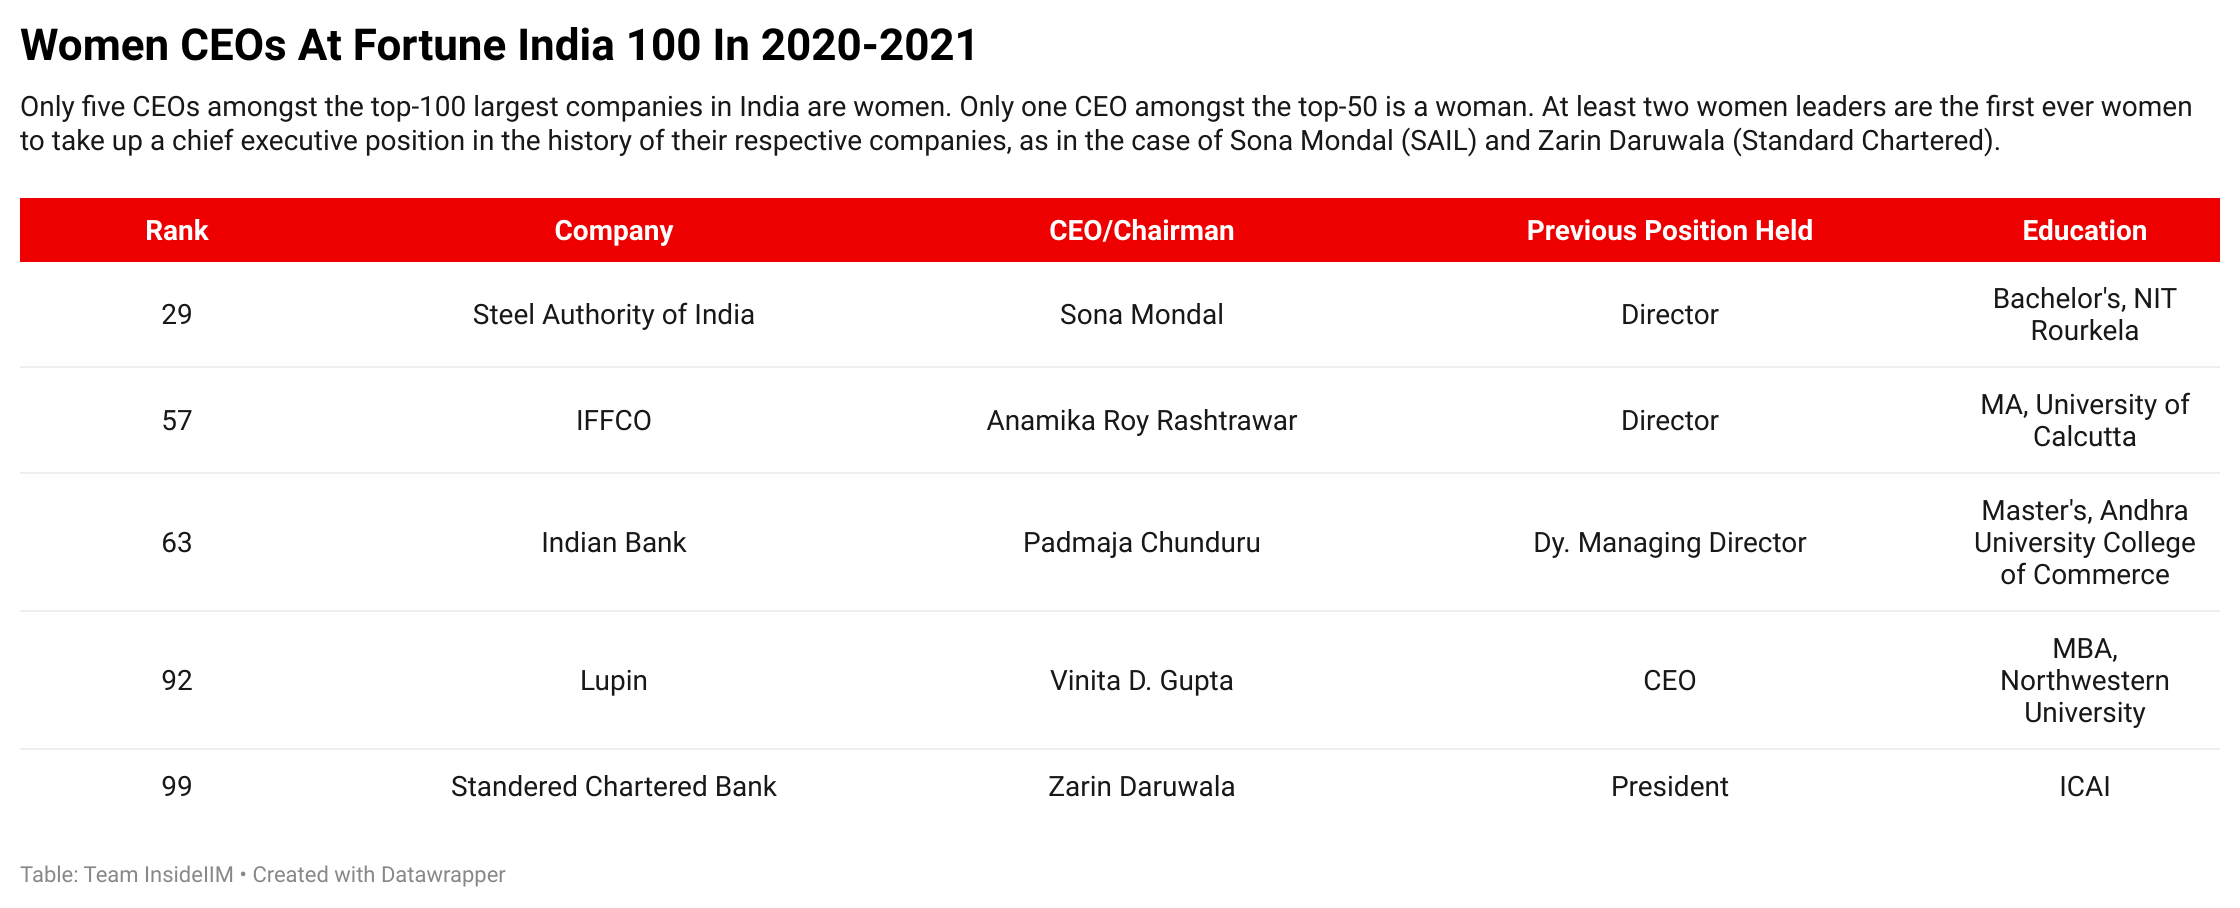 How Many Women Are CEOs At Fortune 500 Companies In India & USA? - InsideIIM